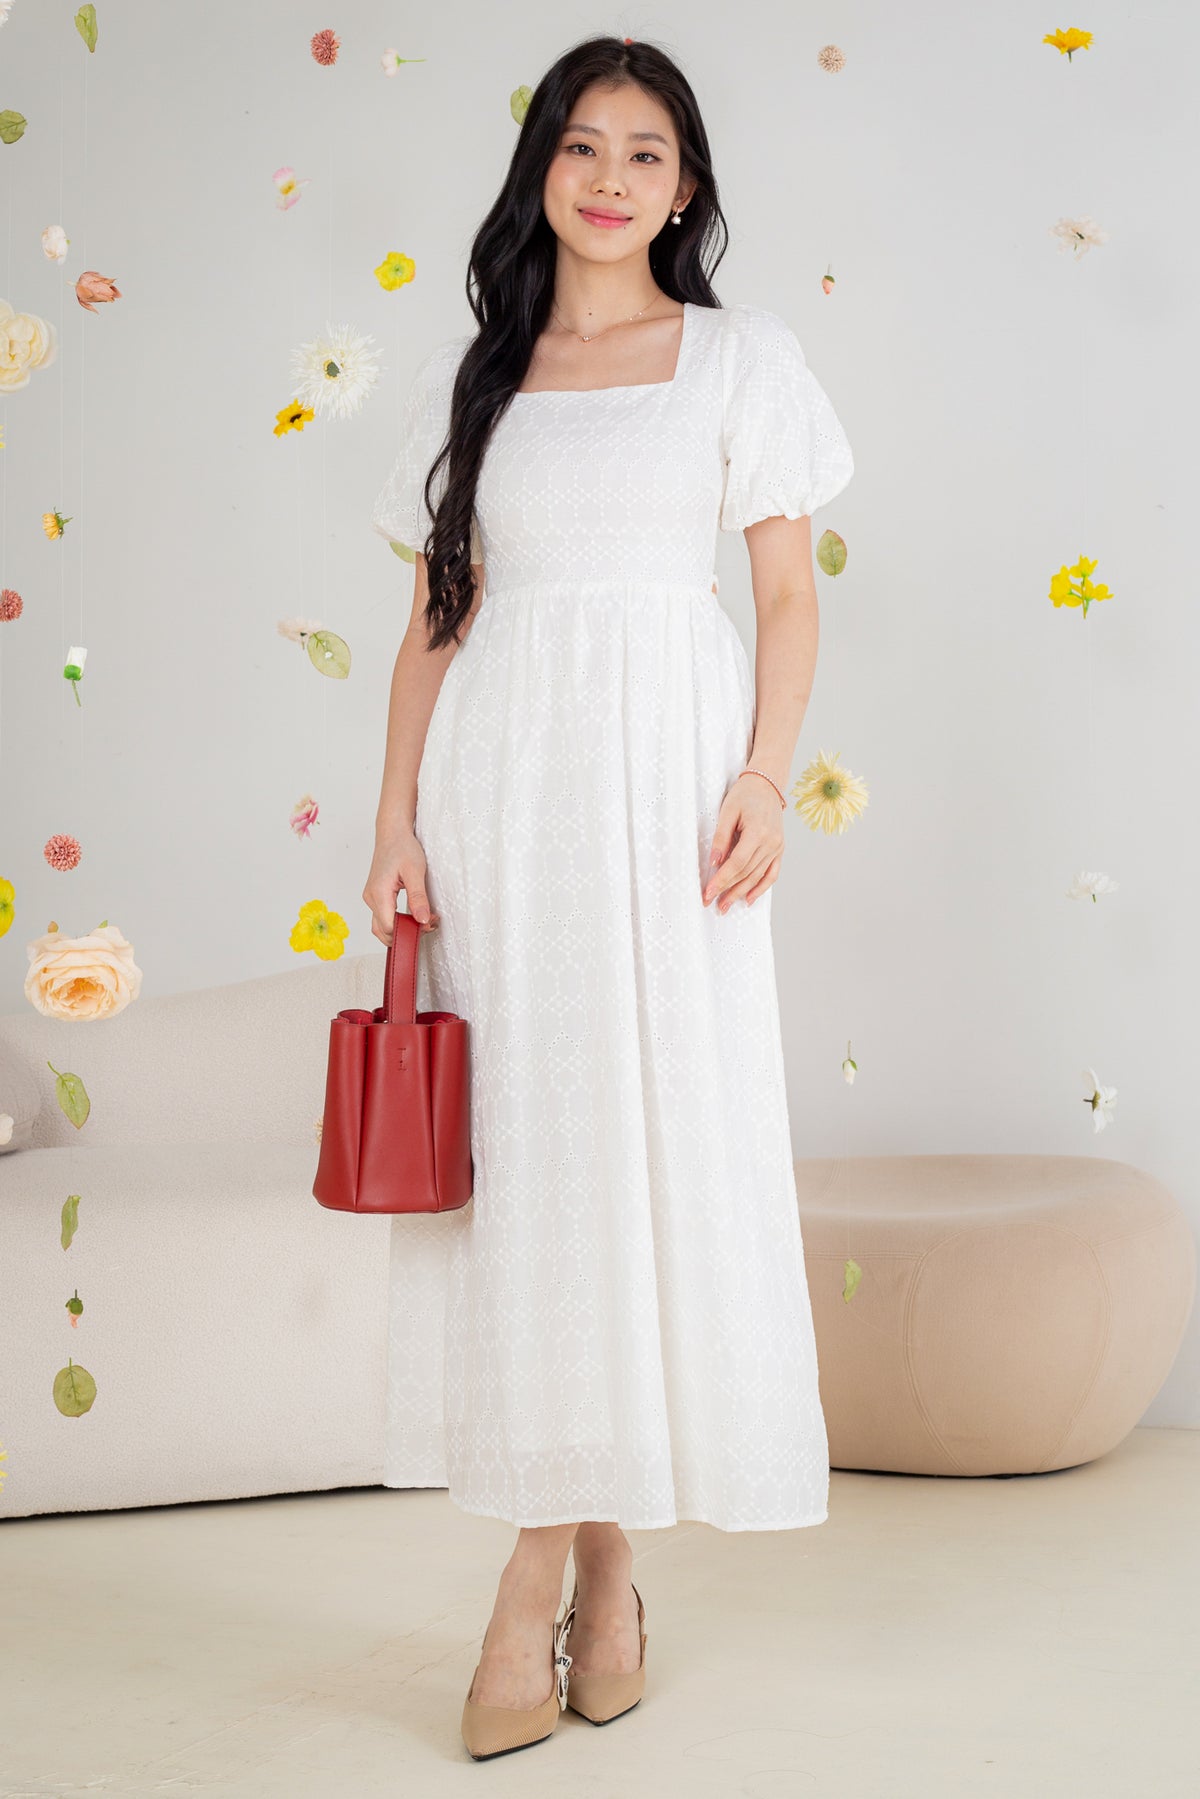 Eyelet Embroidery Shoelace Dress in White